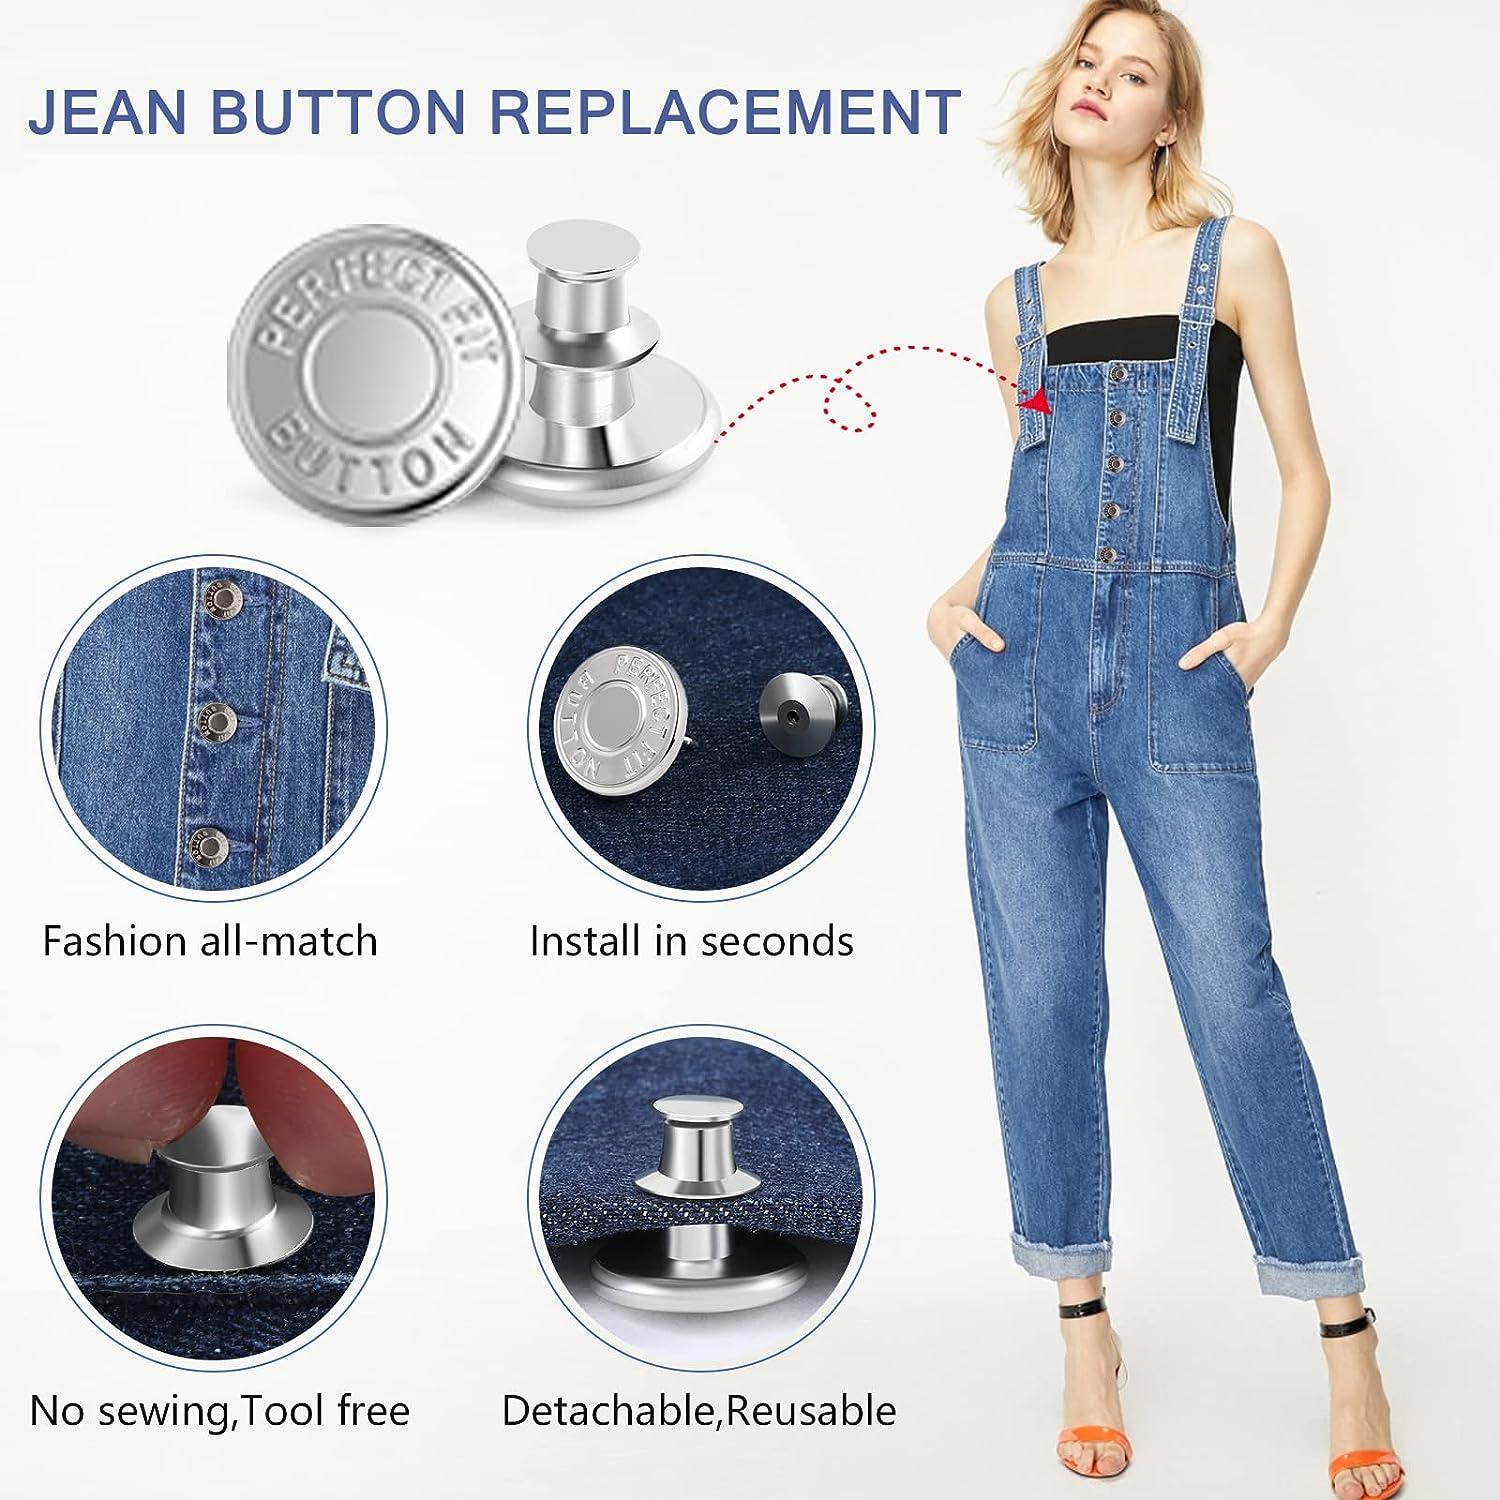 Jean Button Pins, Adjustable Jeans Button Set, Detachable Button for Jeans  Too Big, Waist Tightener Fastener for Pants, No Sewing Required (White)